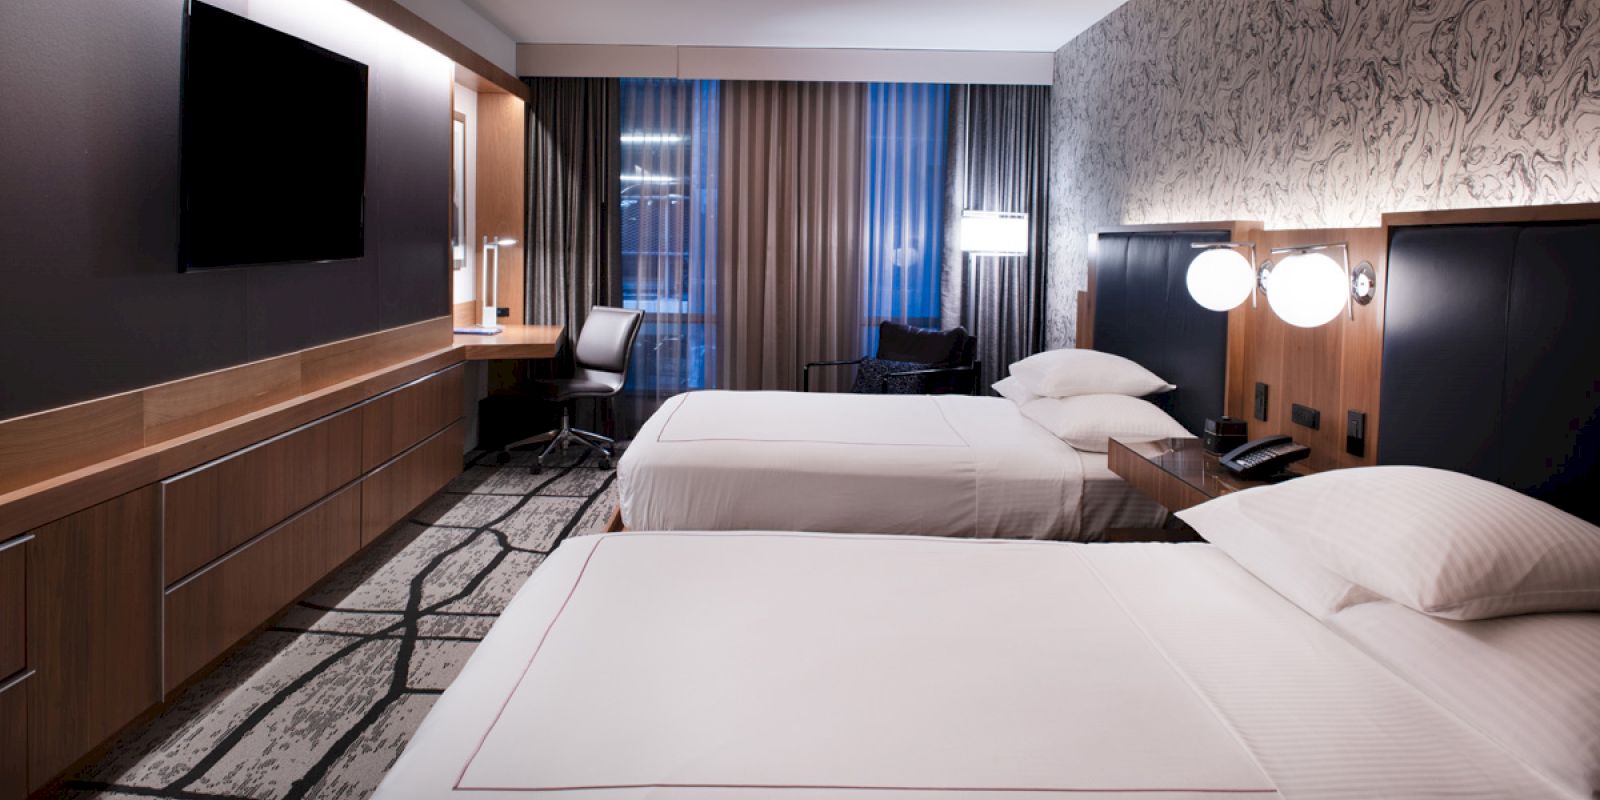 This image shows a modern hotel room with two beds, a wall-mounted TV, a desk with a chair, and ambient lighting.